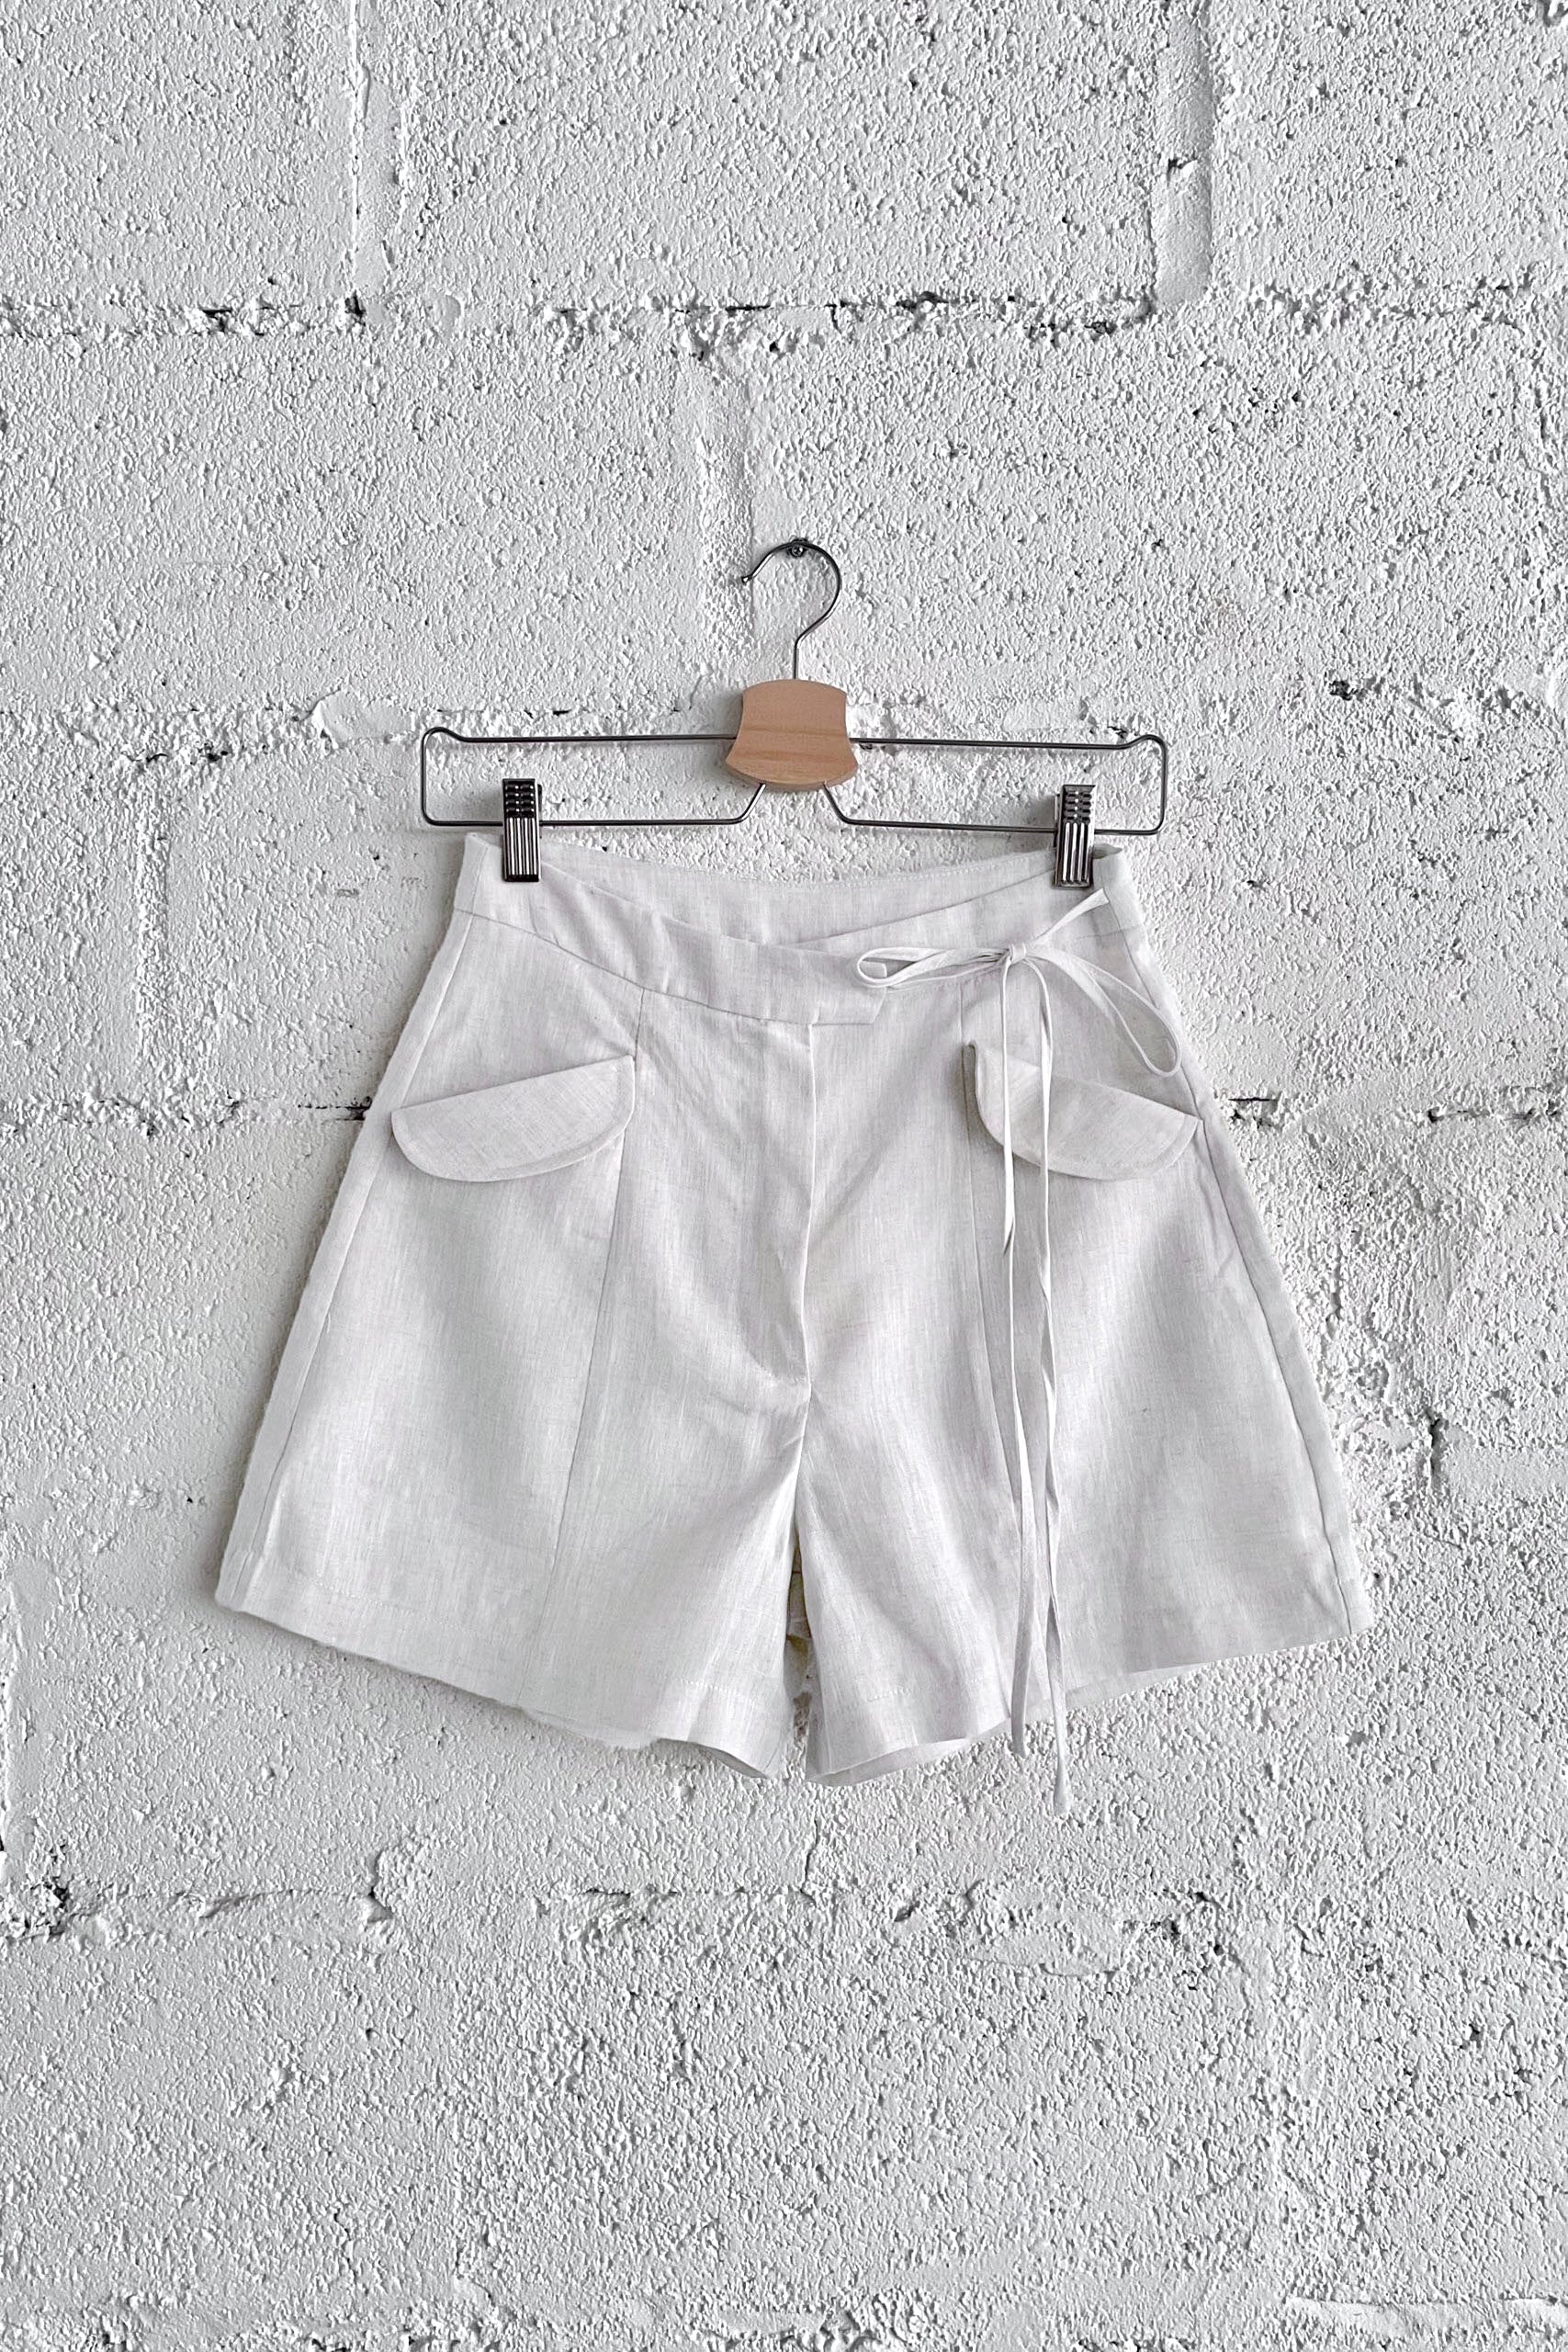 FLARE SHORTS in white